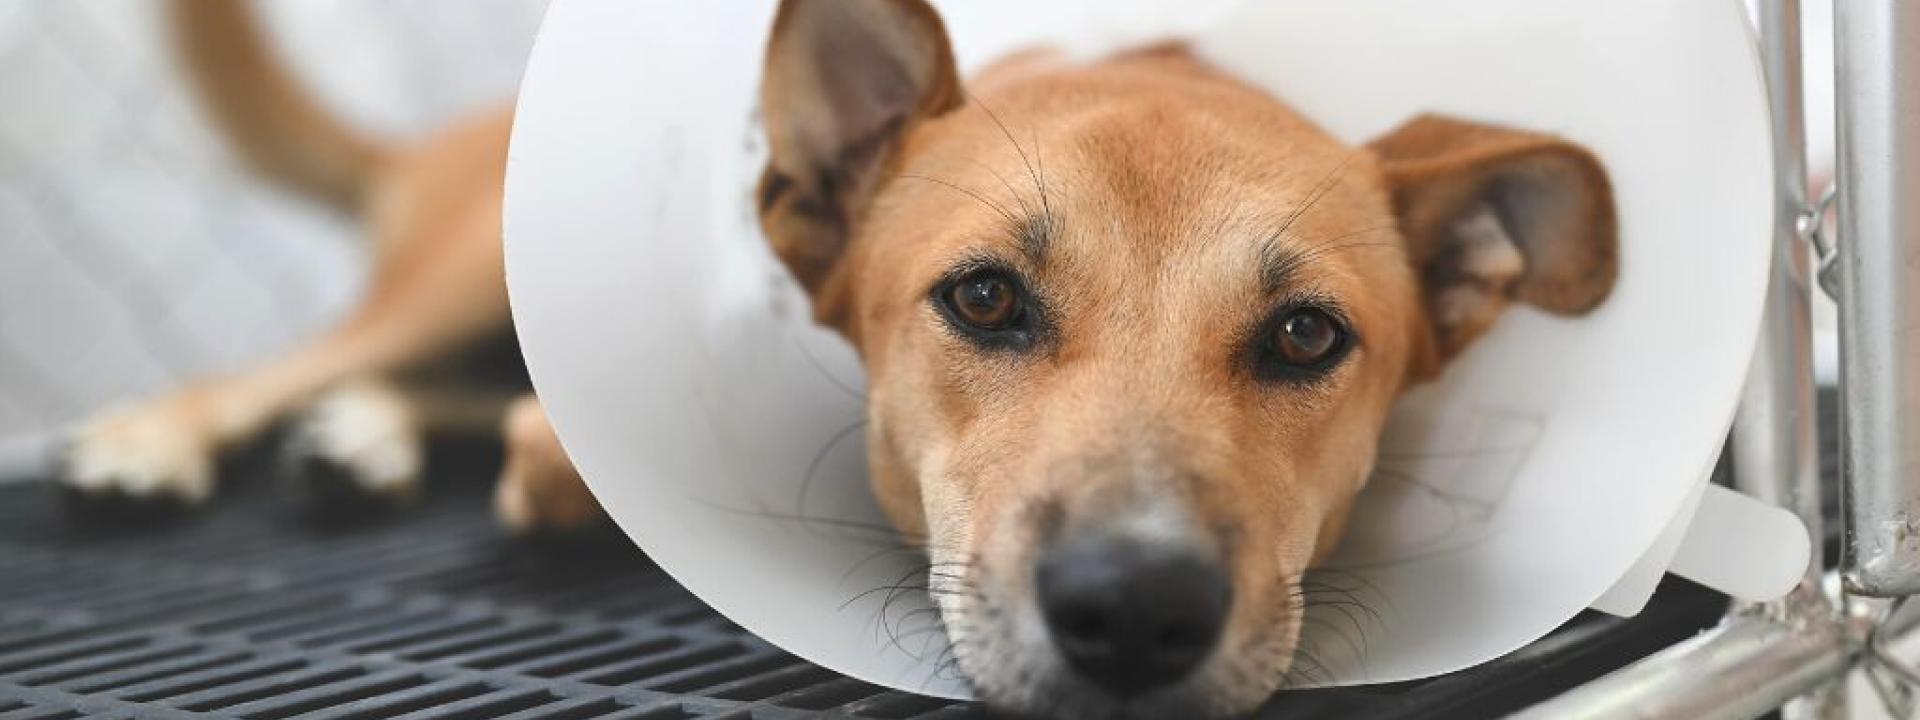 Dog wearing a protective cone on his neck and lying down